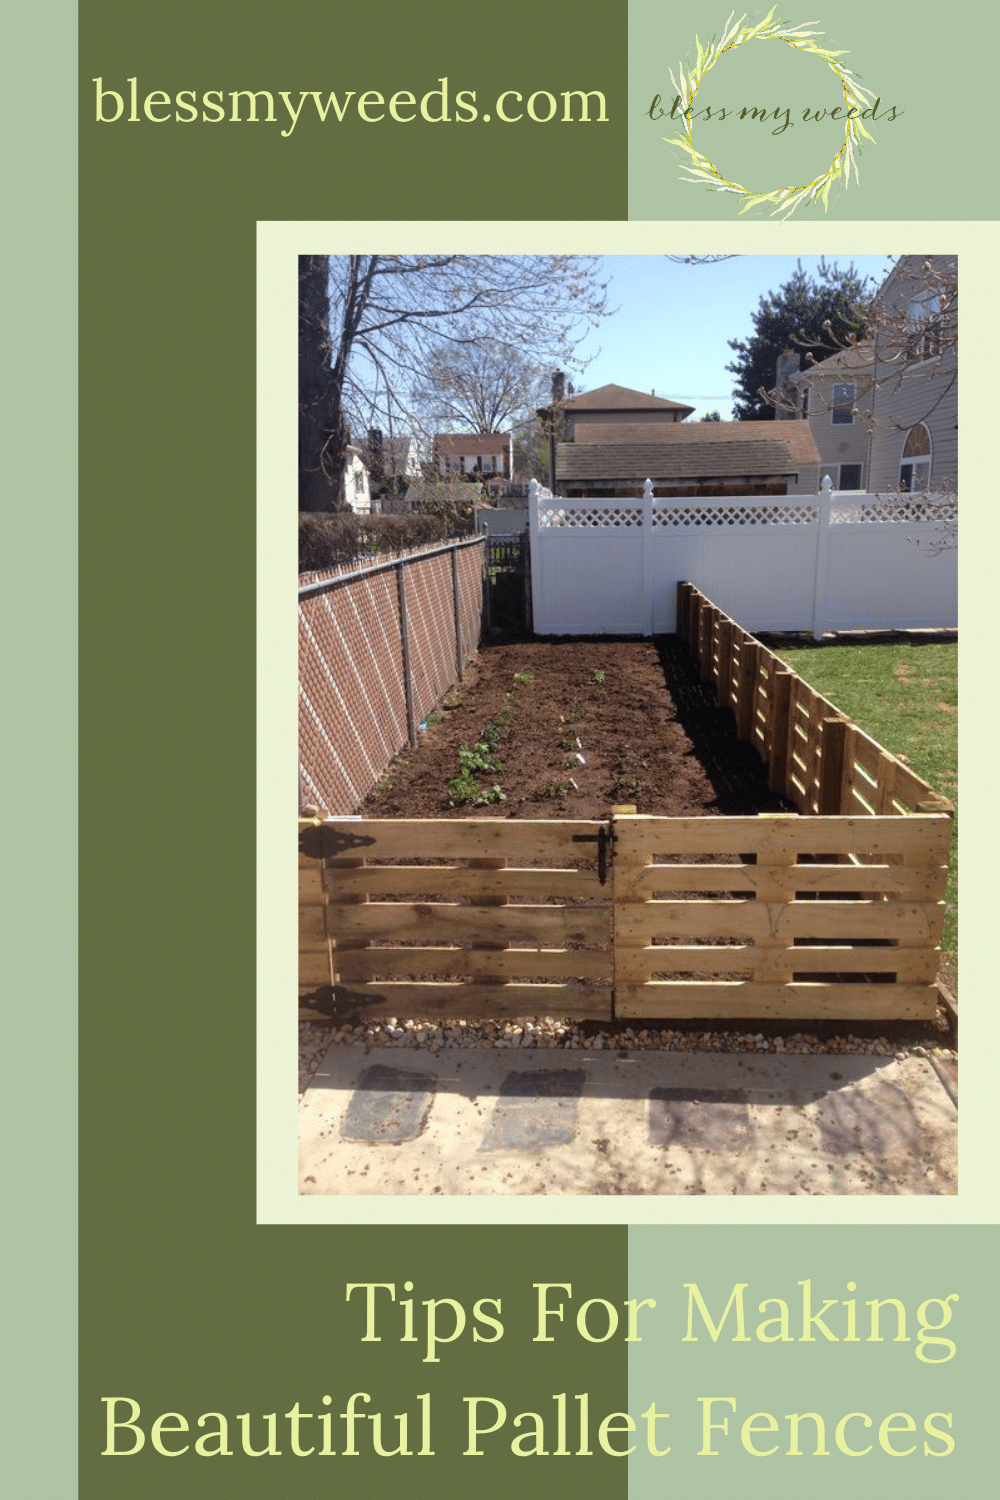 Blessmyweeds.com will inspire you to create the garden or yard of your dreams. From building to growing, learn how you can maximize your property's potential. Create a stunning fence right away just by repurposing old pallets!